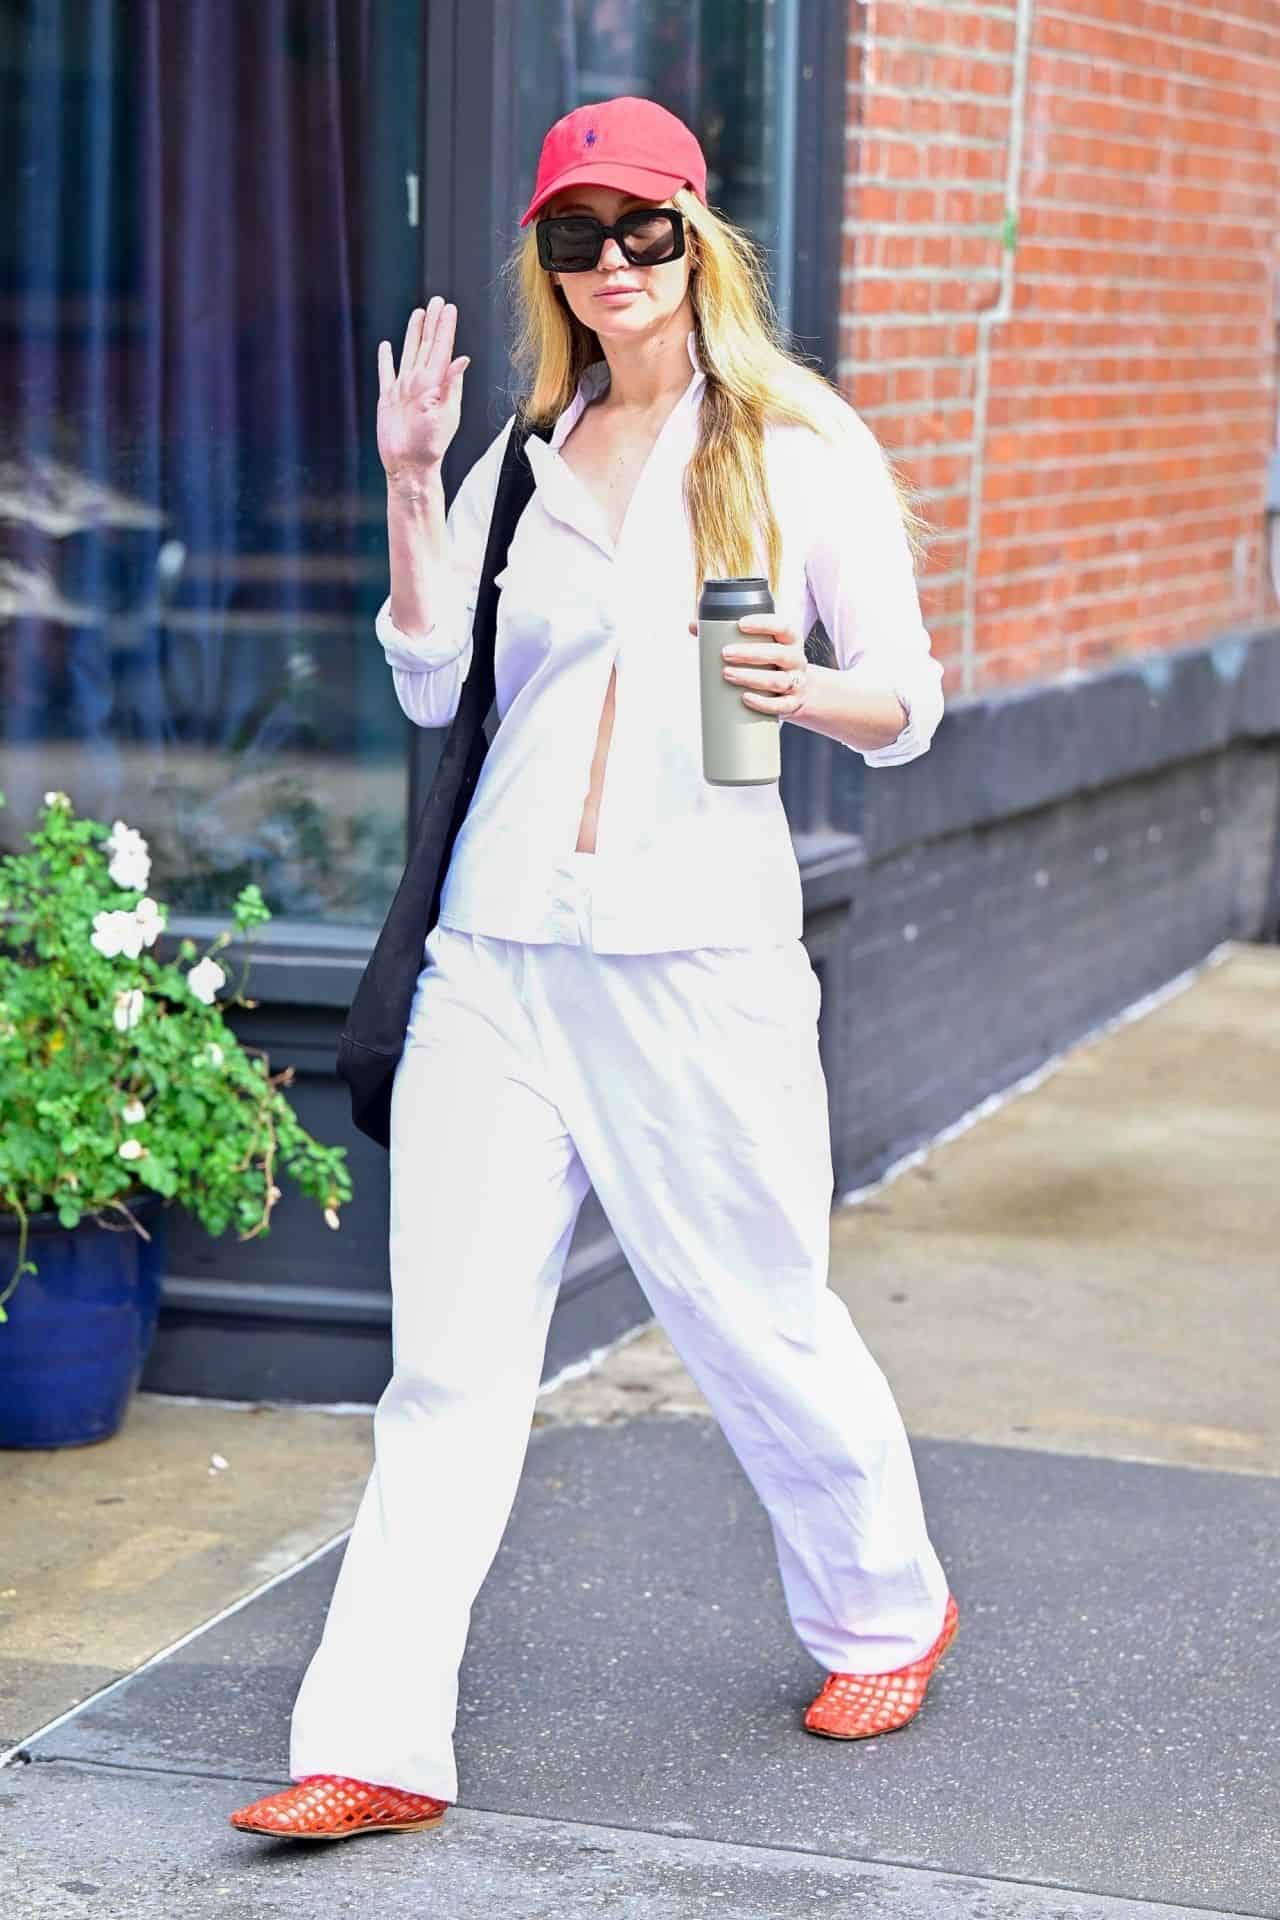 Jennifer Lawrence Runs Errands in All White with Red Mesh Shoes in New York - 06-26-2024 - 1